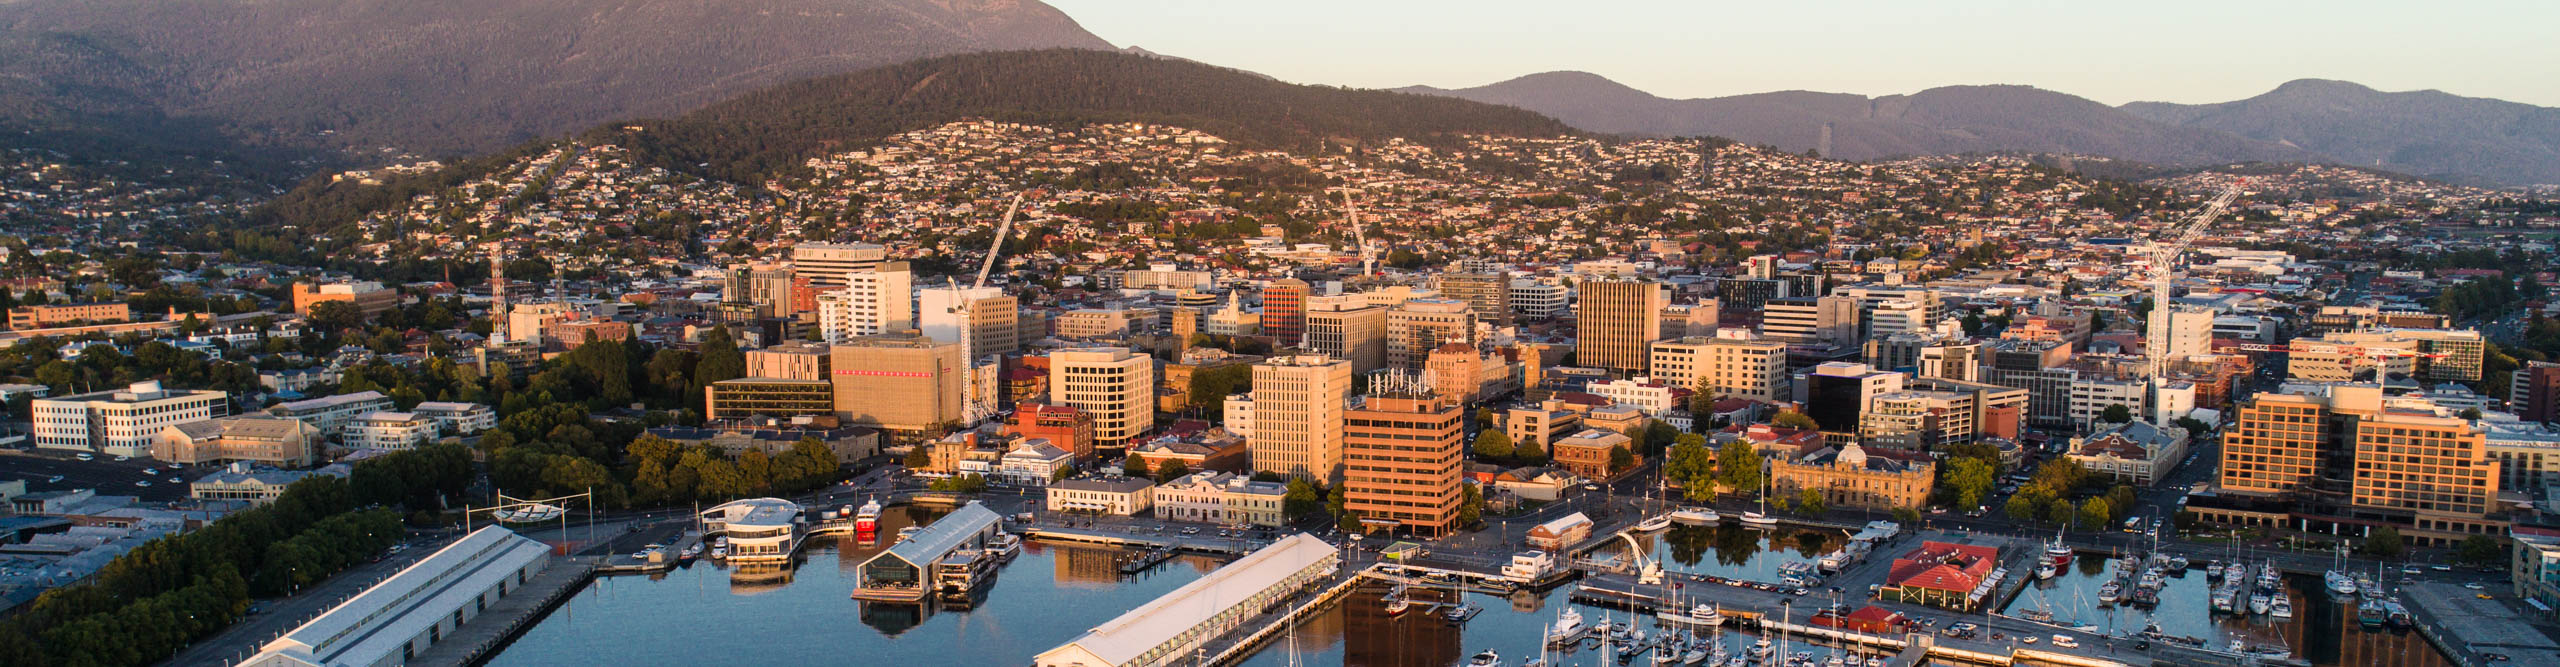 Sunset over Hobart harbour with building glowing brand own a clear day, Tasmania, Australia 